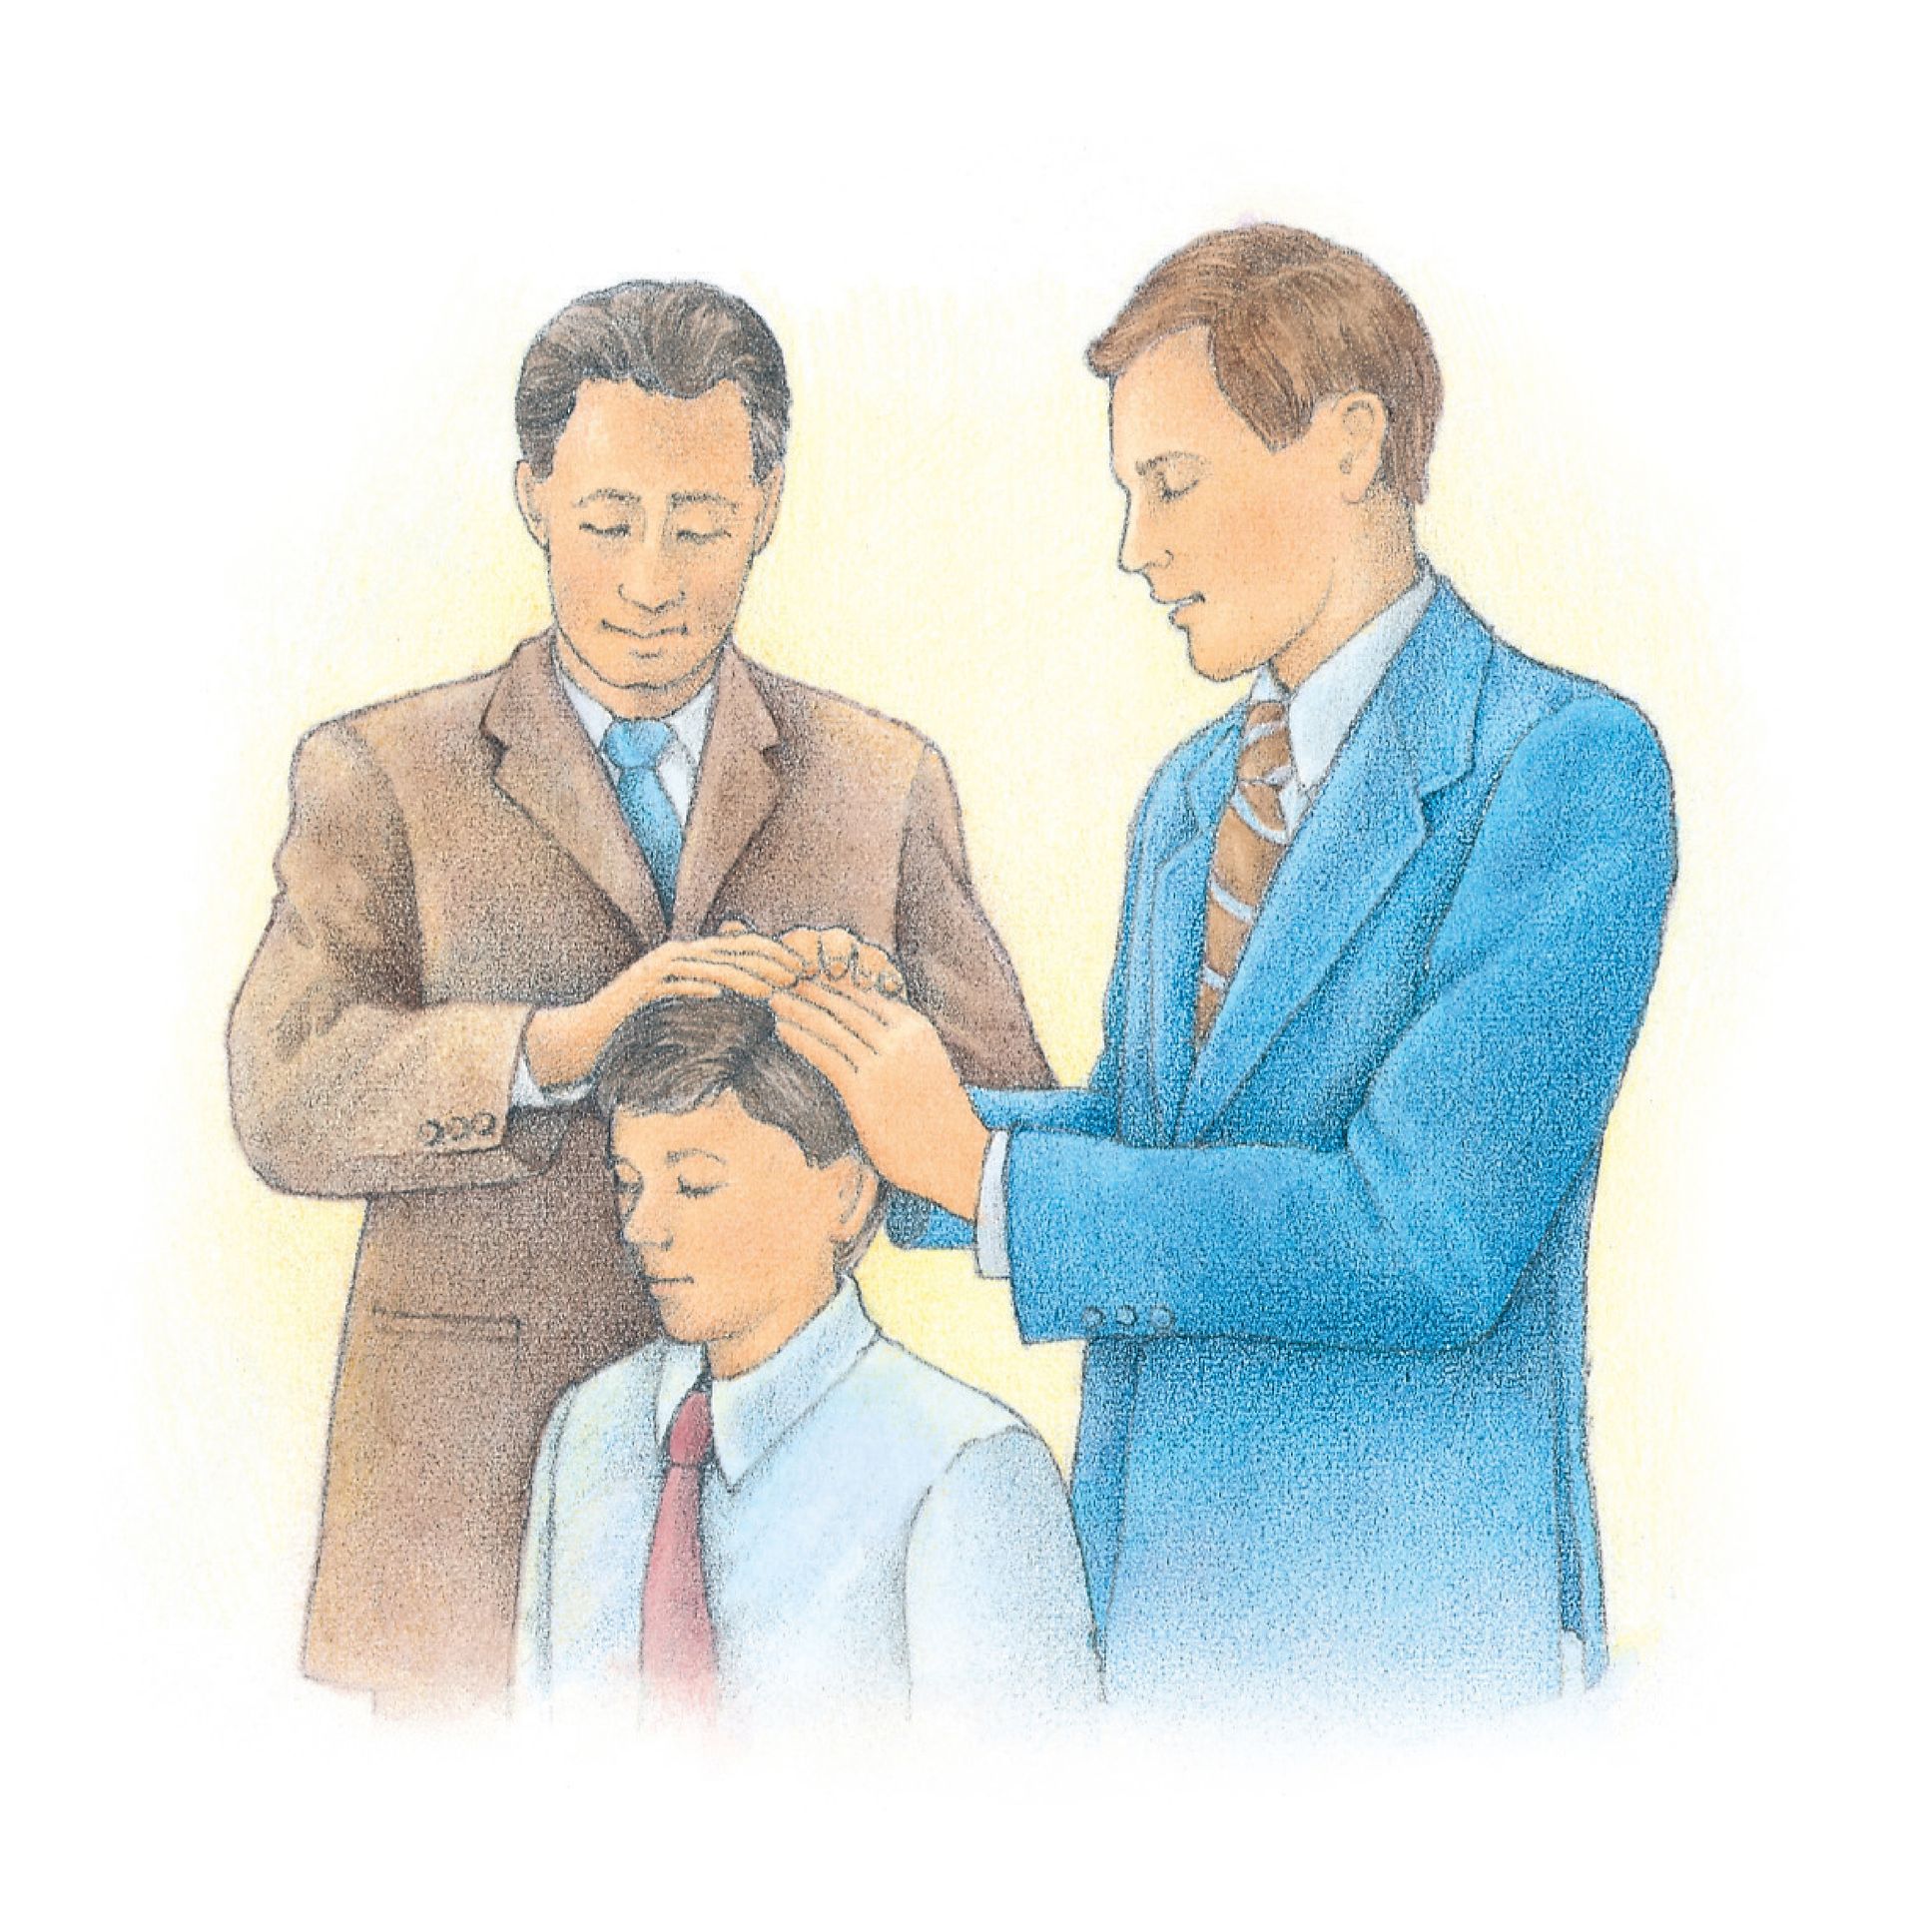 A young boy receiving the priesthood by the laying on of hands. From the Children’s Songbook, page 125, “The Fifth Article of Faith”; watercolor illustration by Beth Whittaker.